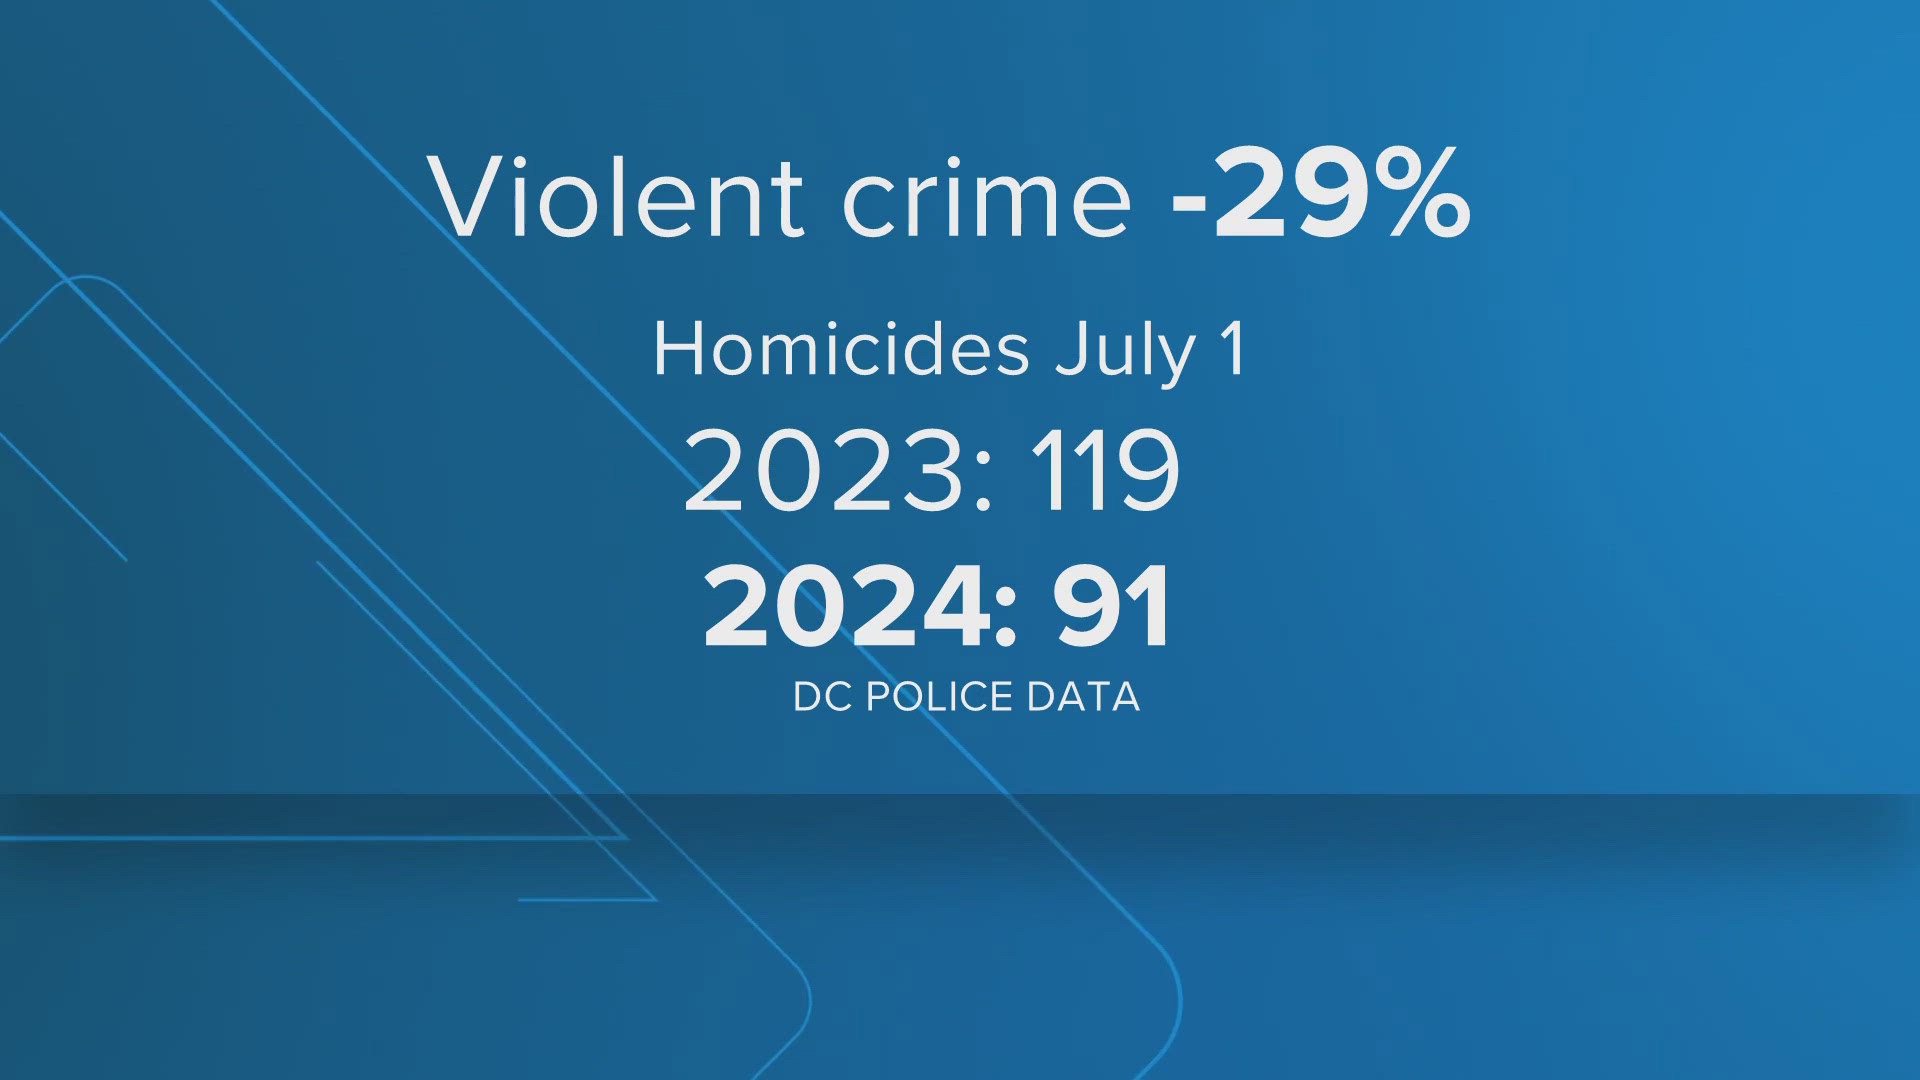 Police data shows that overall crime is down 17% compared to the same time last year.